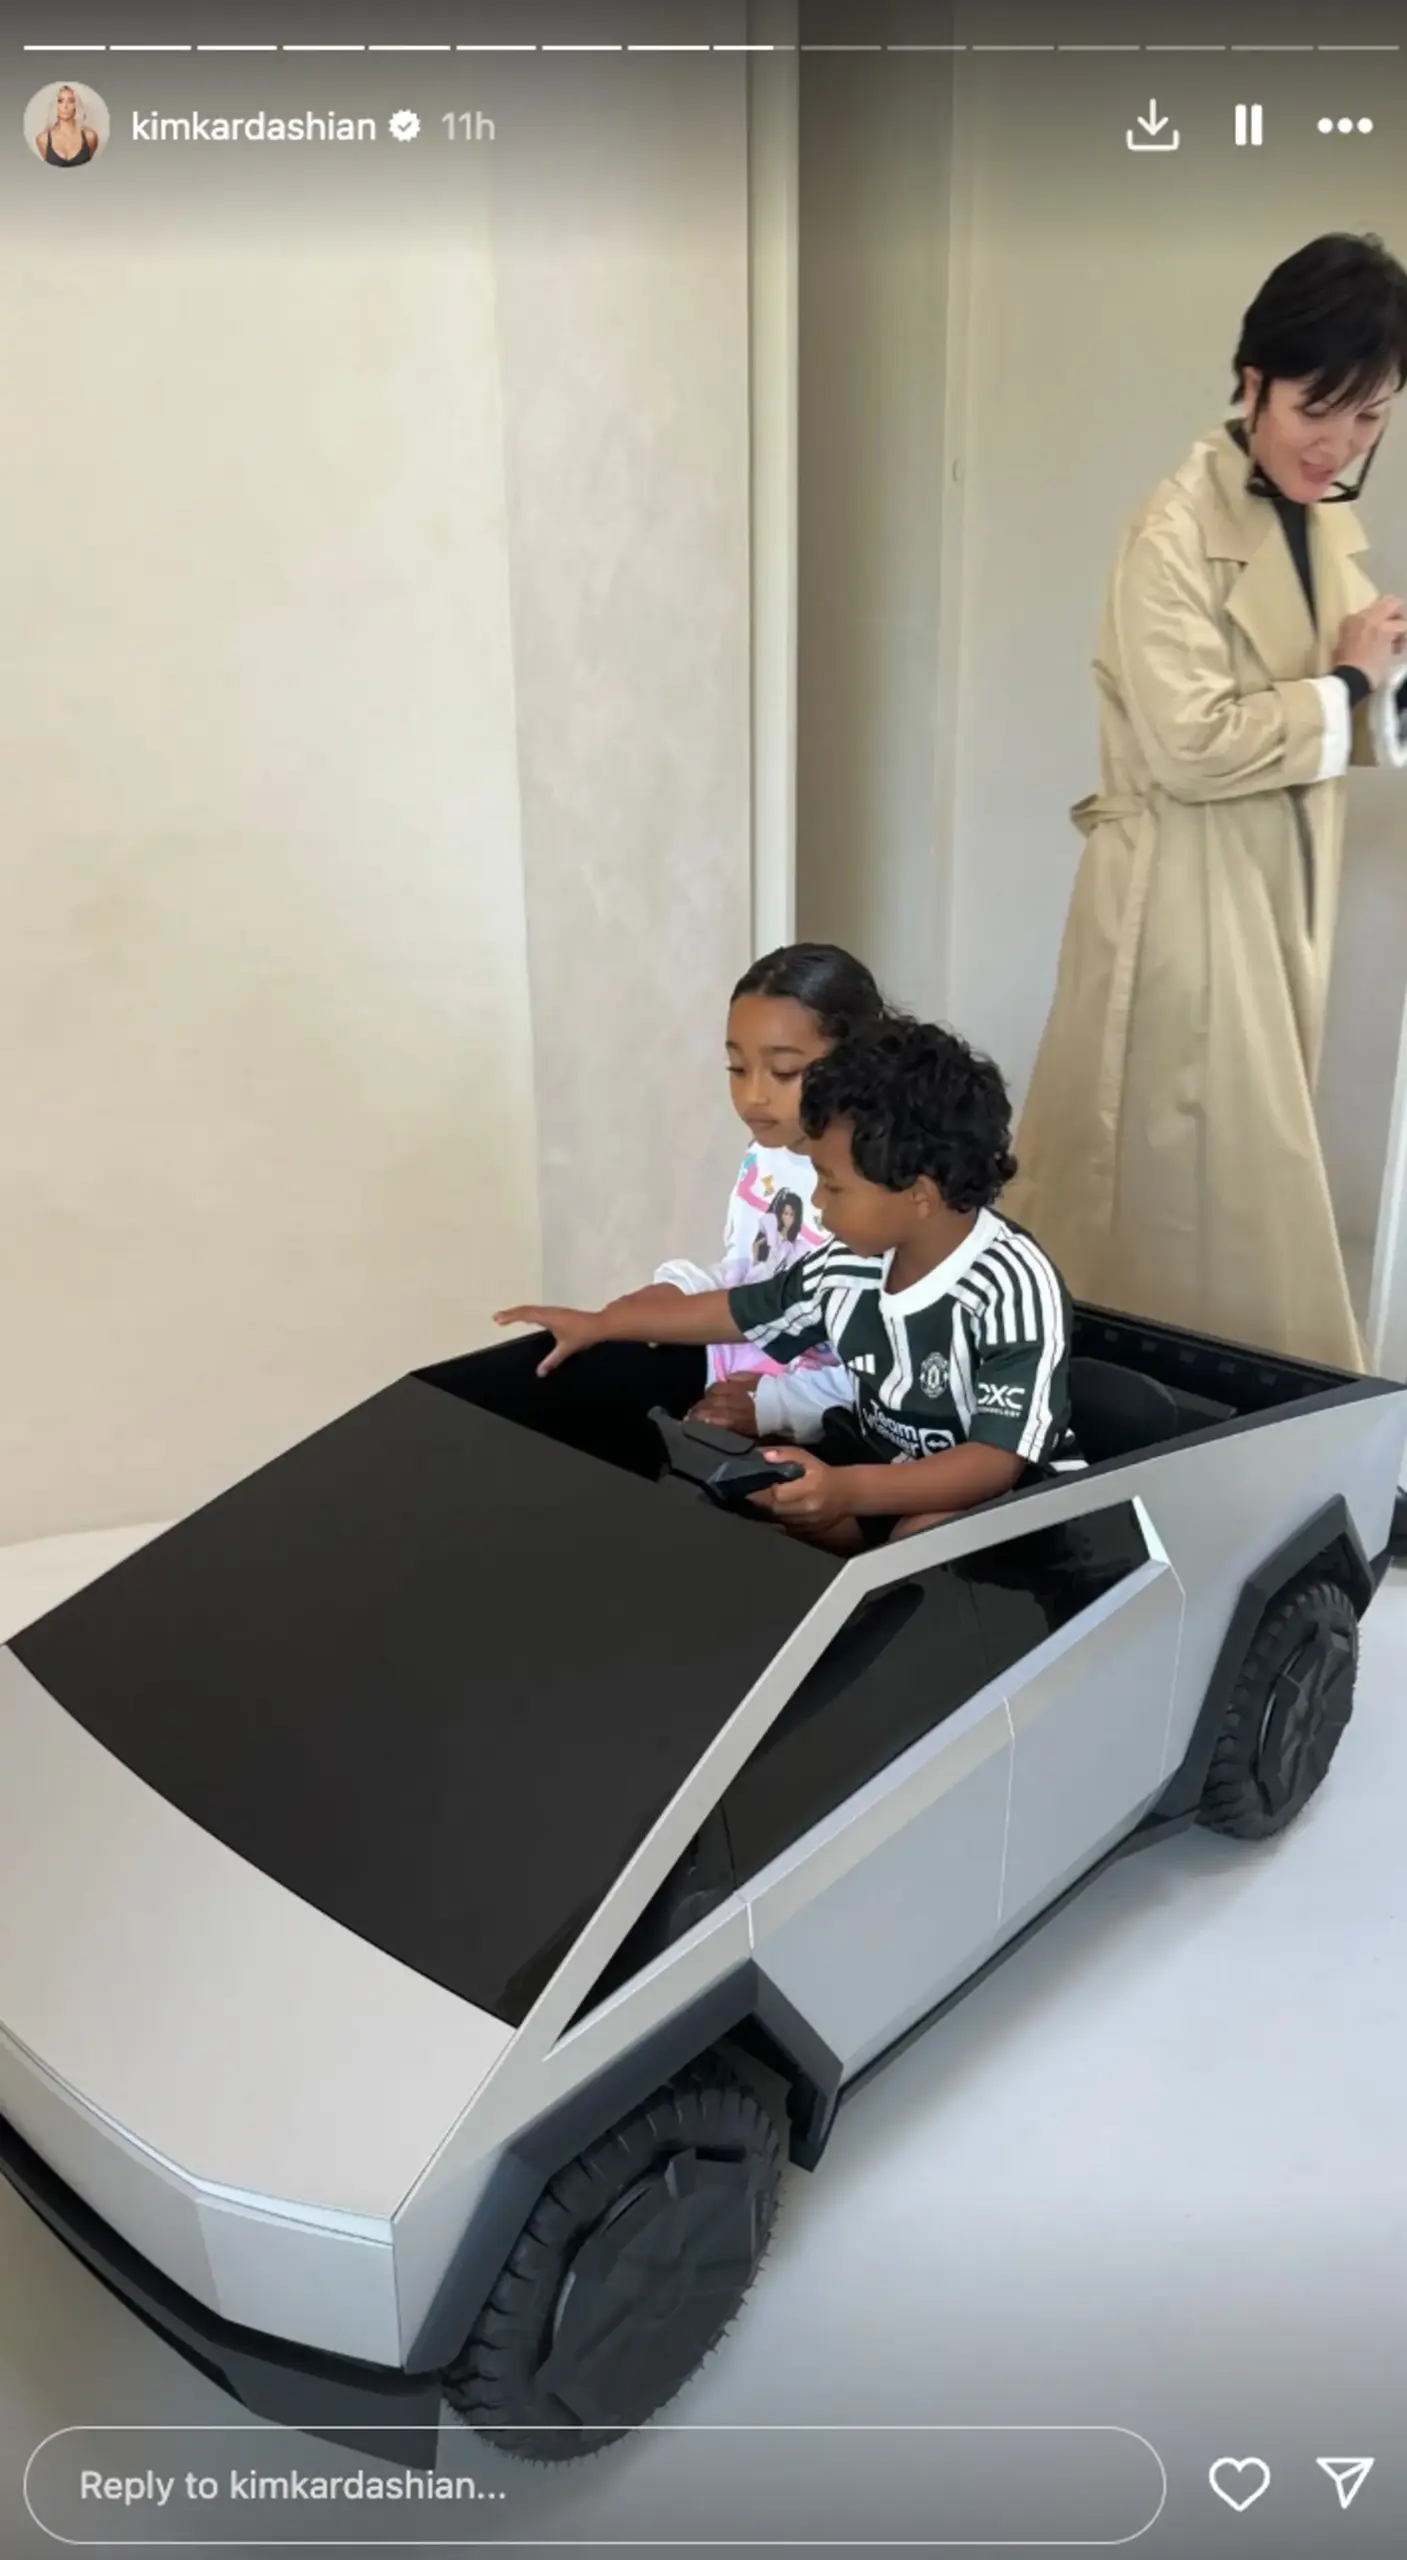 Discover the Ultimate Gift: A $1,500 Mini Tesla Cybertruck for a Celebrity Kid's Birthday Bash!